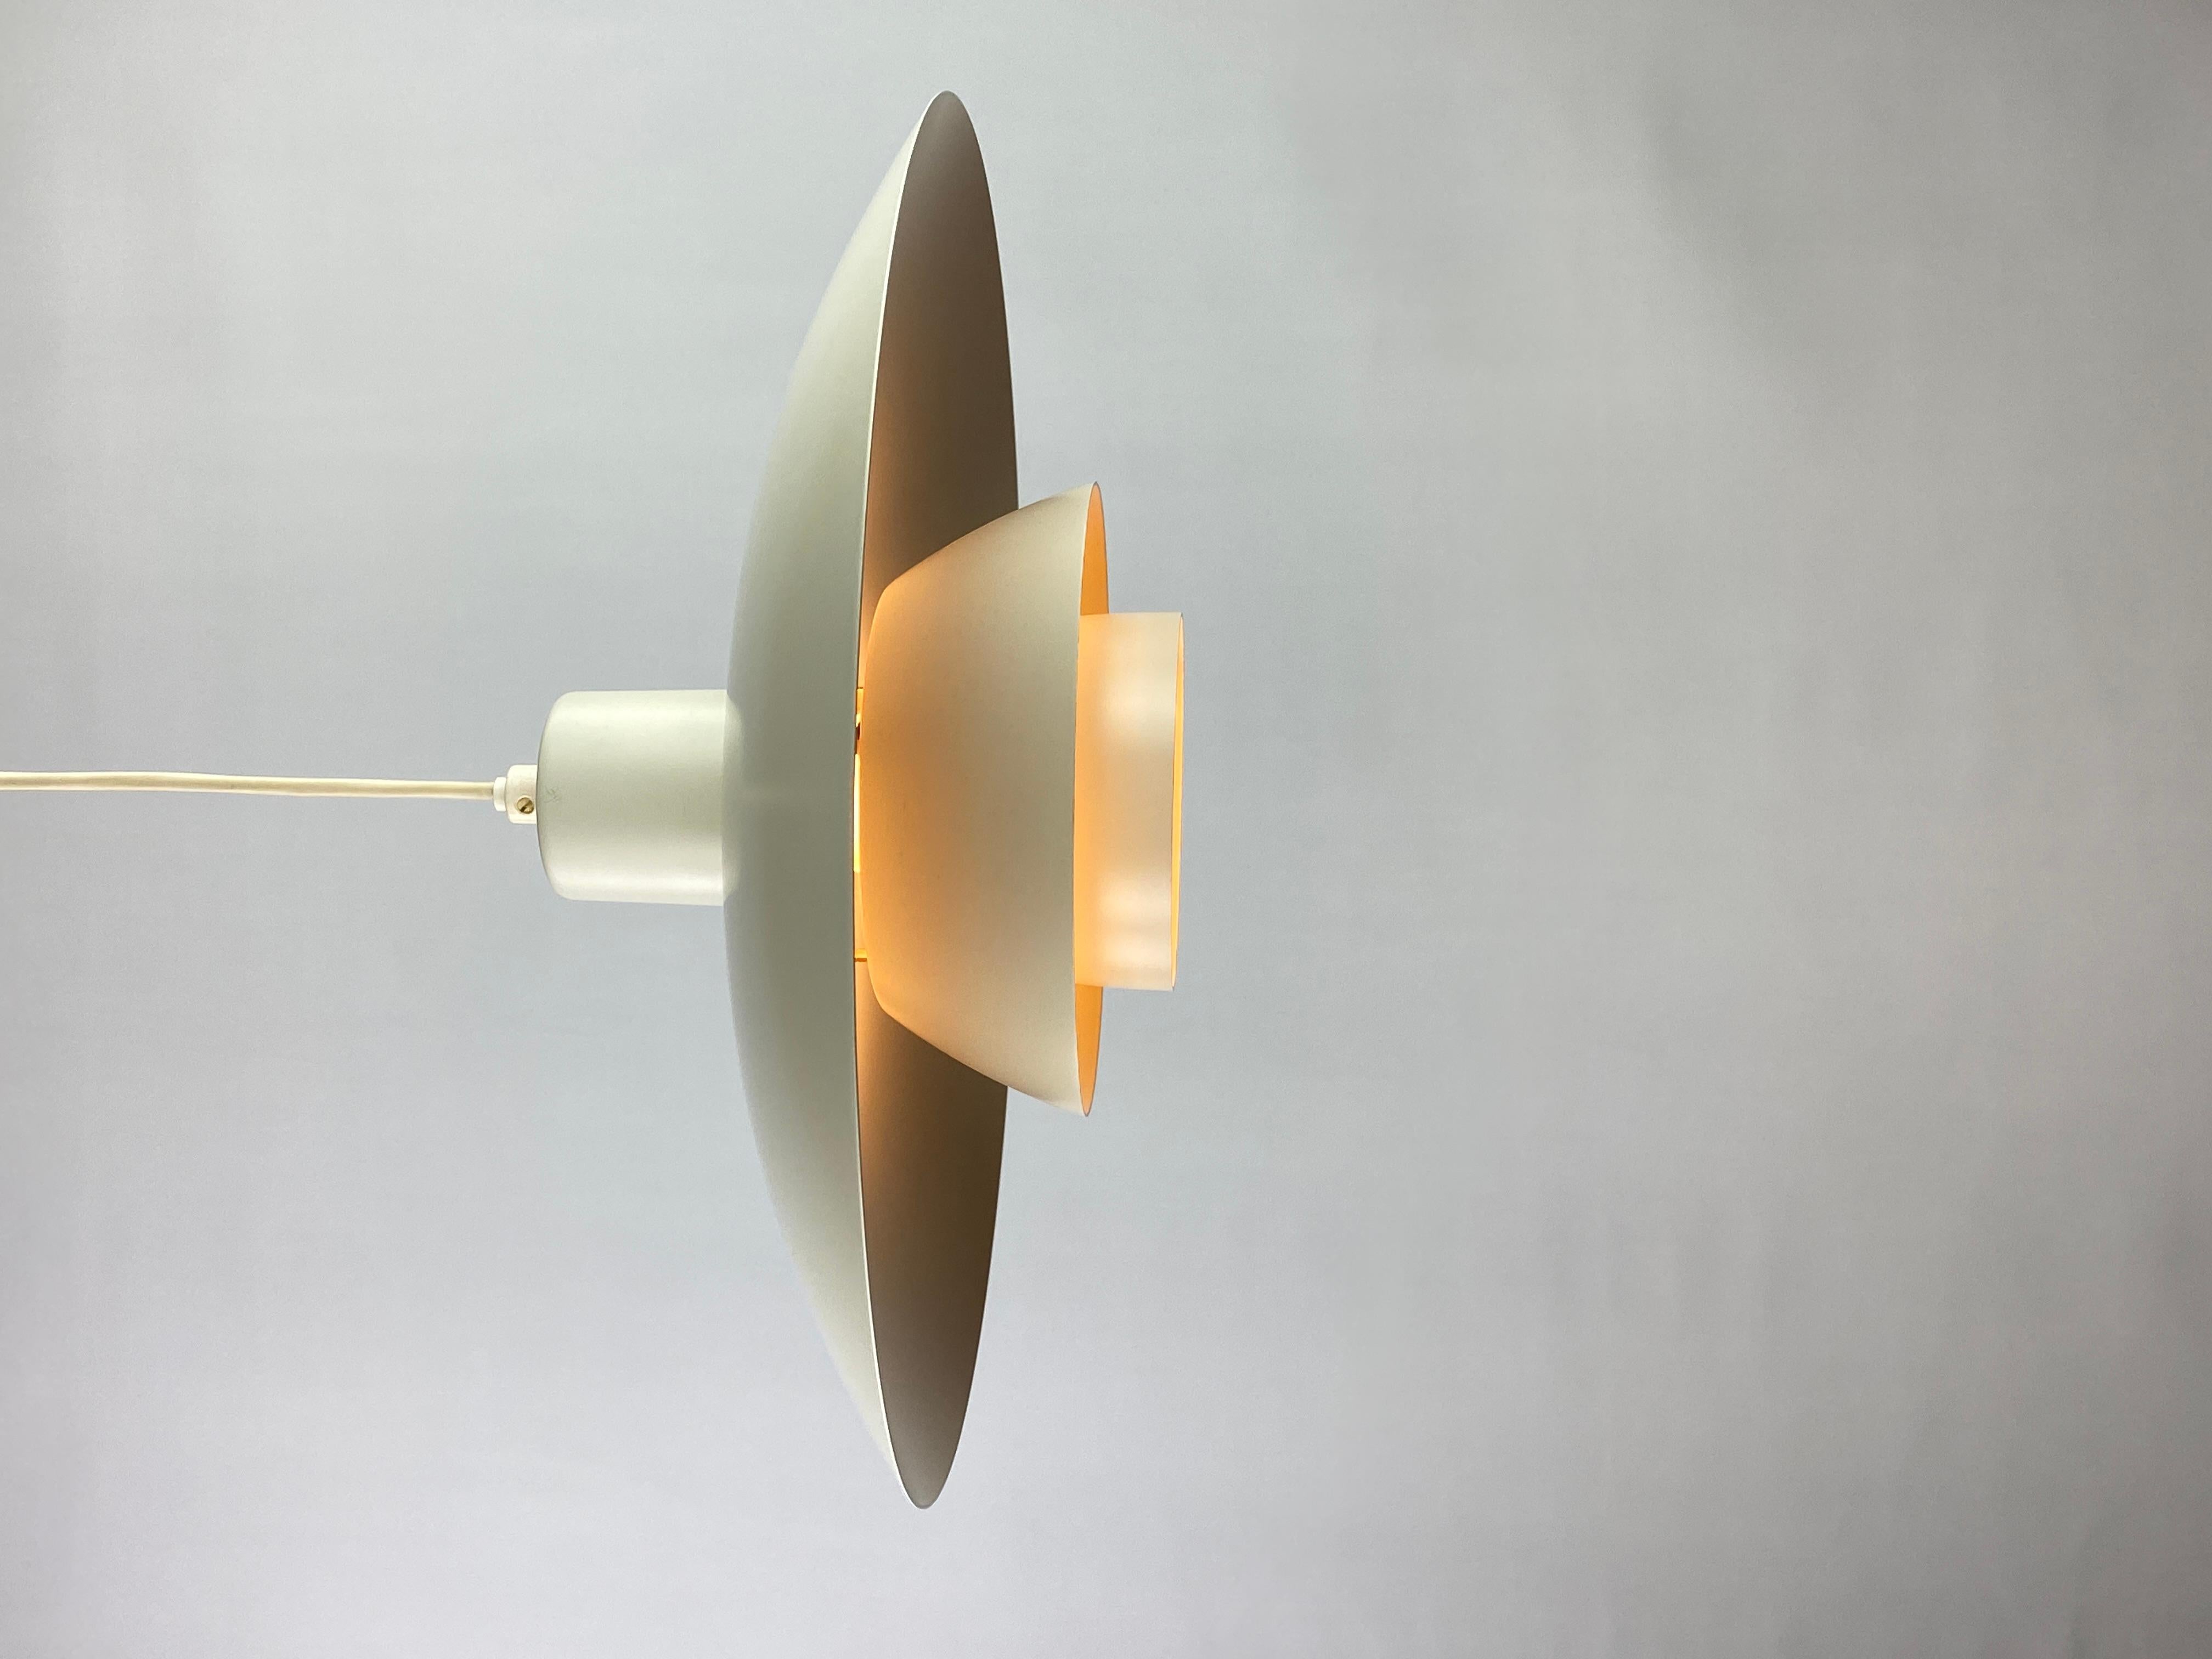 Here is one of Poul Henningsen's most popular pendants lights from the 1960's. The PH 4/3 pendant lamp is made of metal with off-white tones and orange accents.

This is a original vintage piece from the 60's. I have two vintage ones available. Also